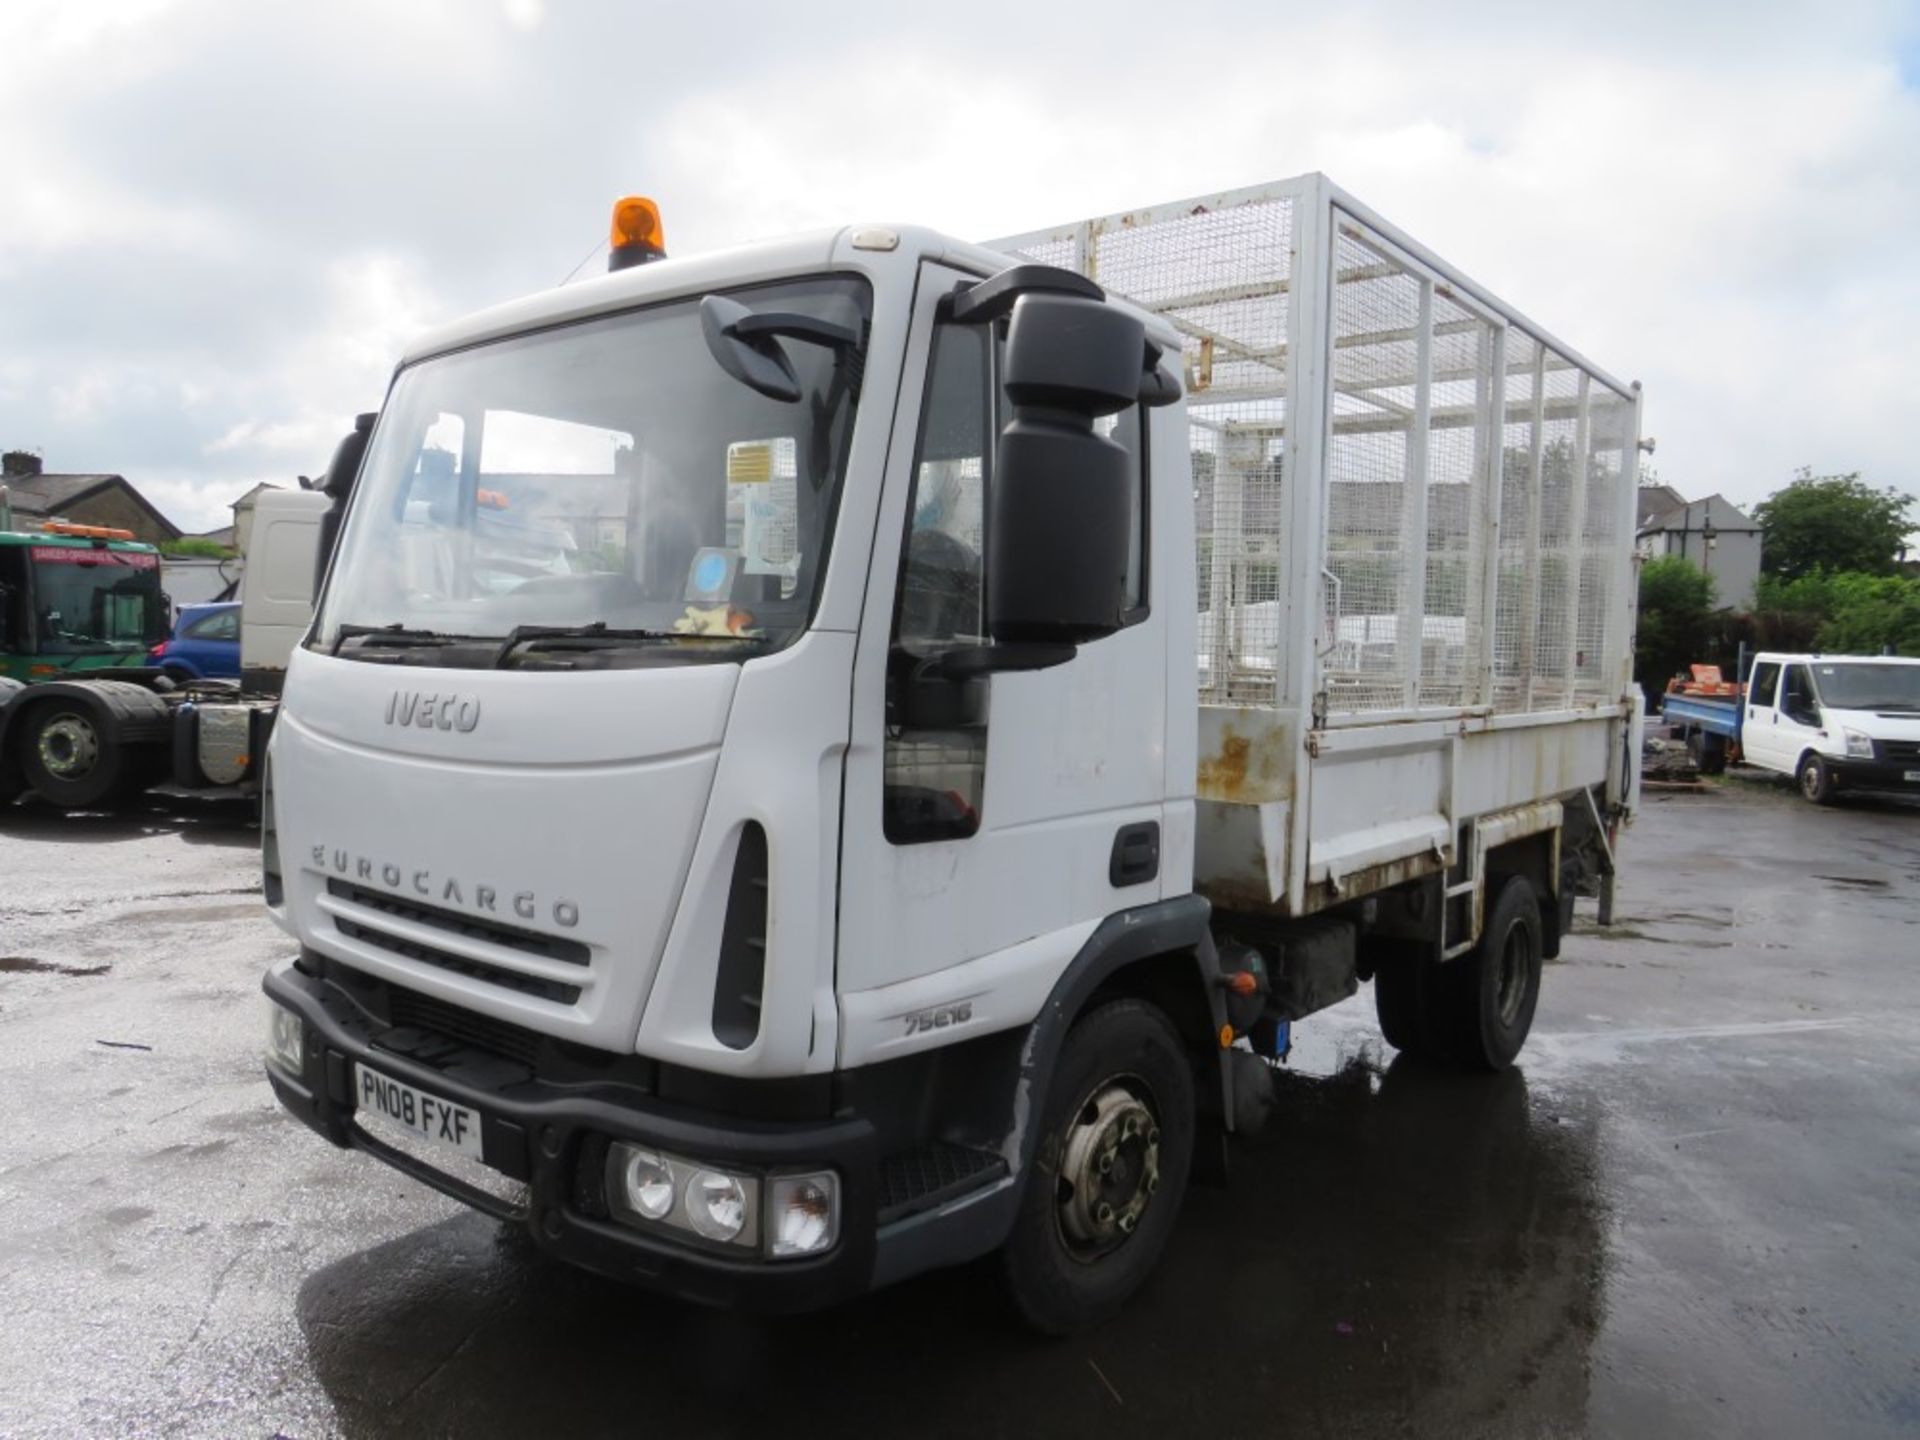 08 reg IVECO EURO CARGO ML75E16 CAGED TIPPER (DIRECT COUNCIL) 1ST REG 08/08, TEST 11/21, 126074KM, - Image 2 of 6